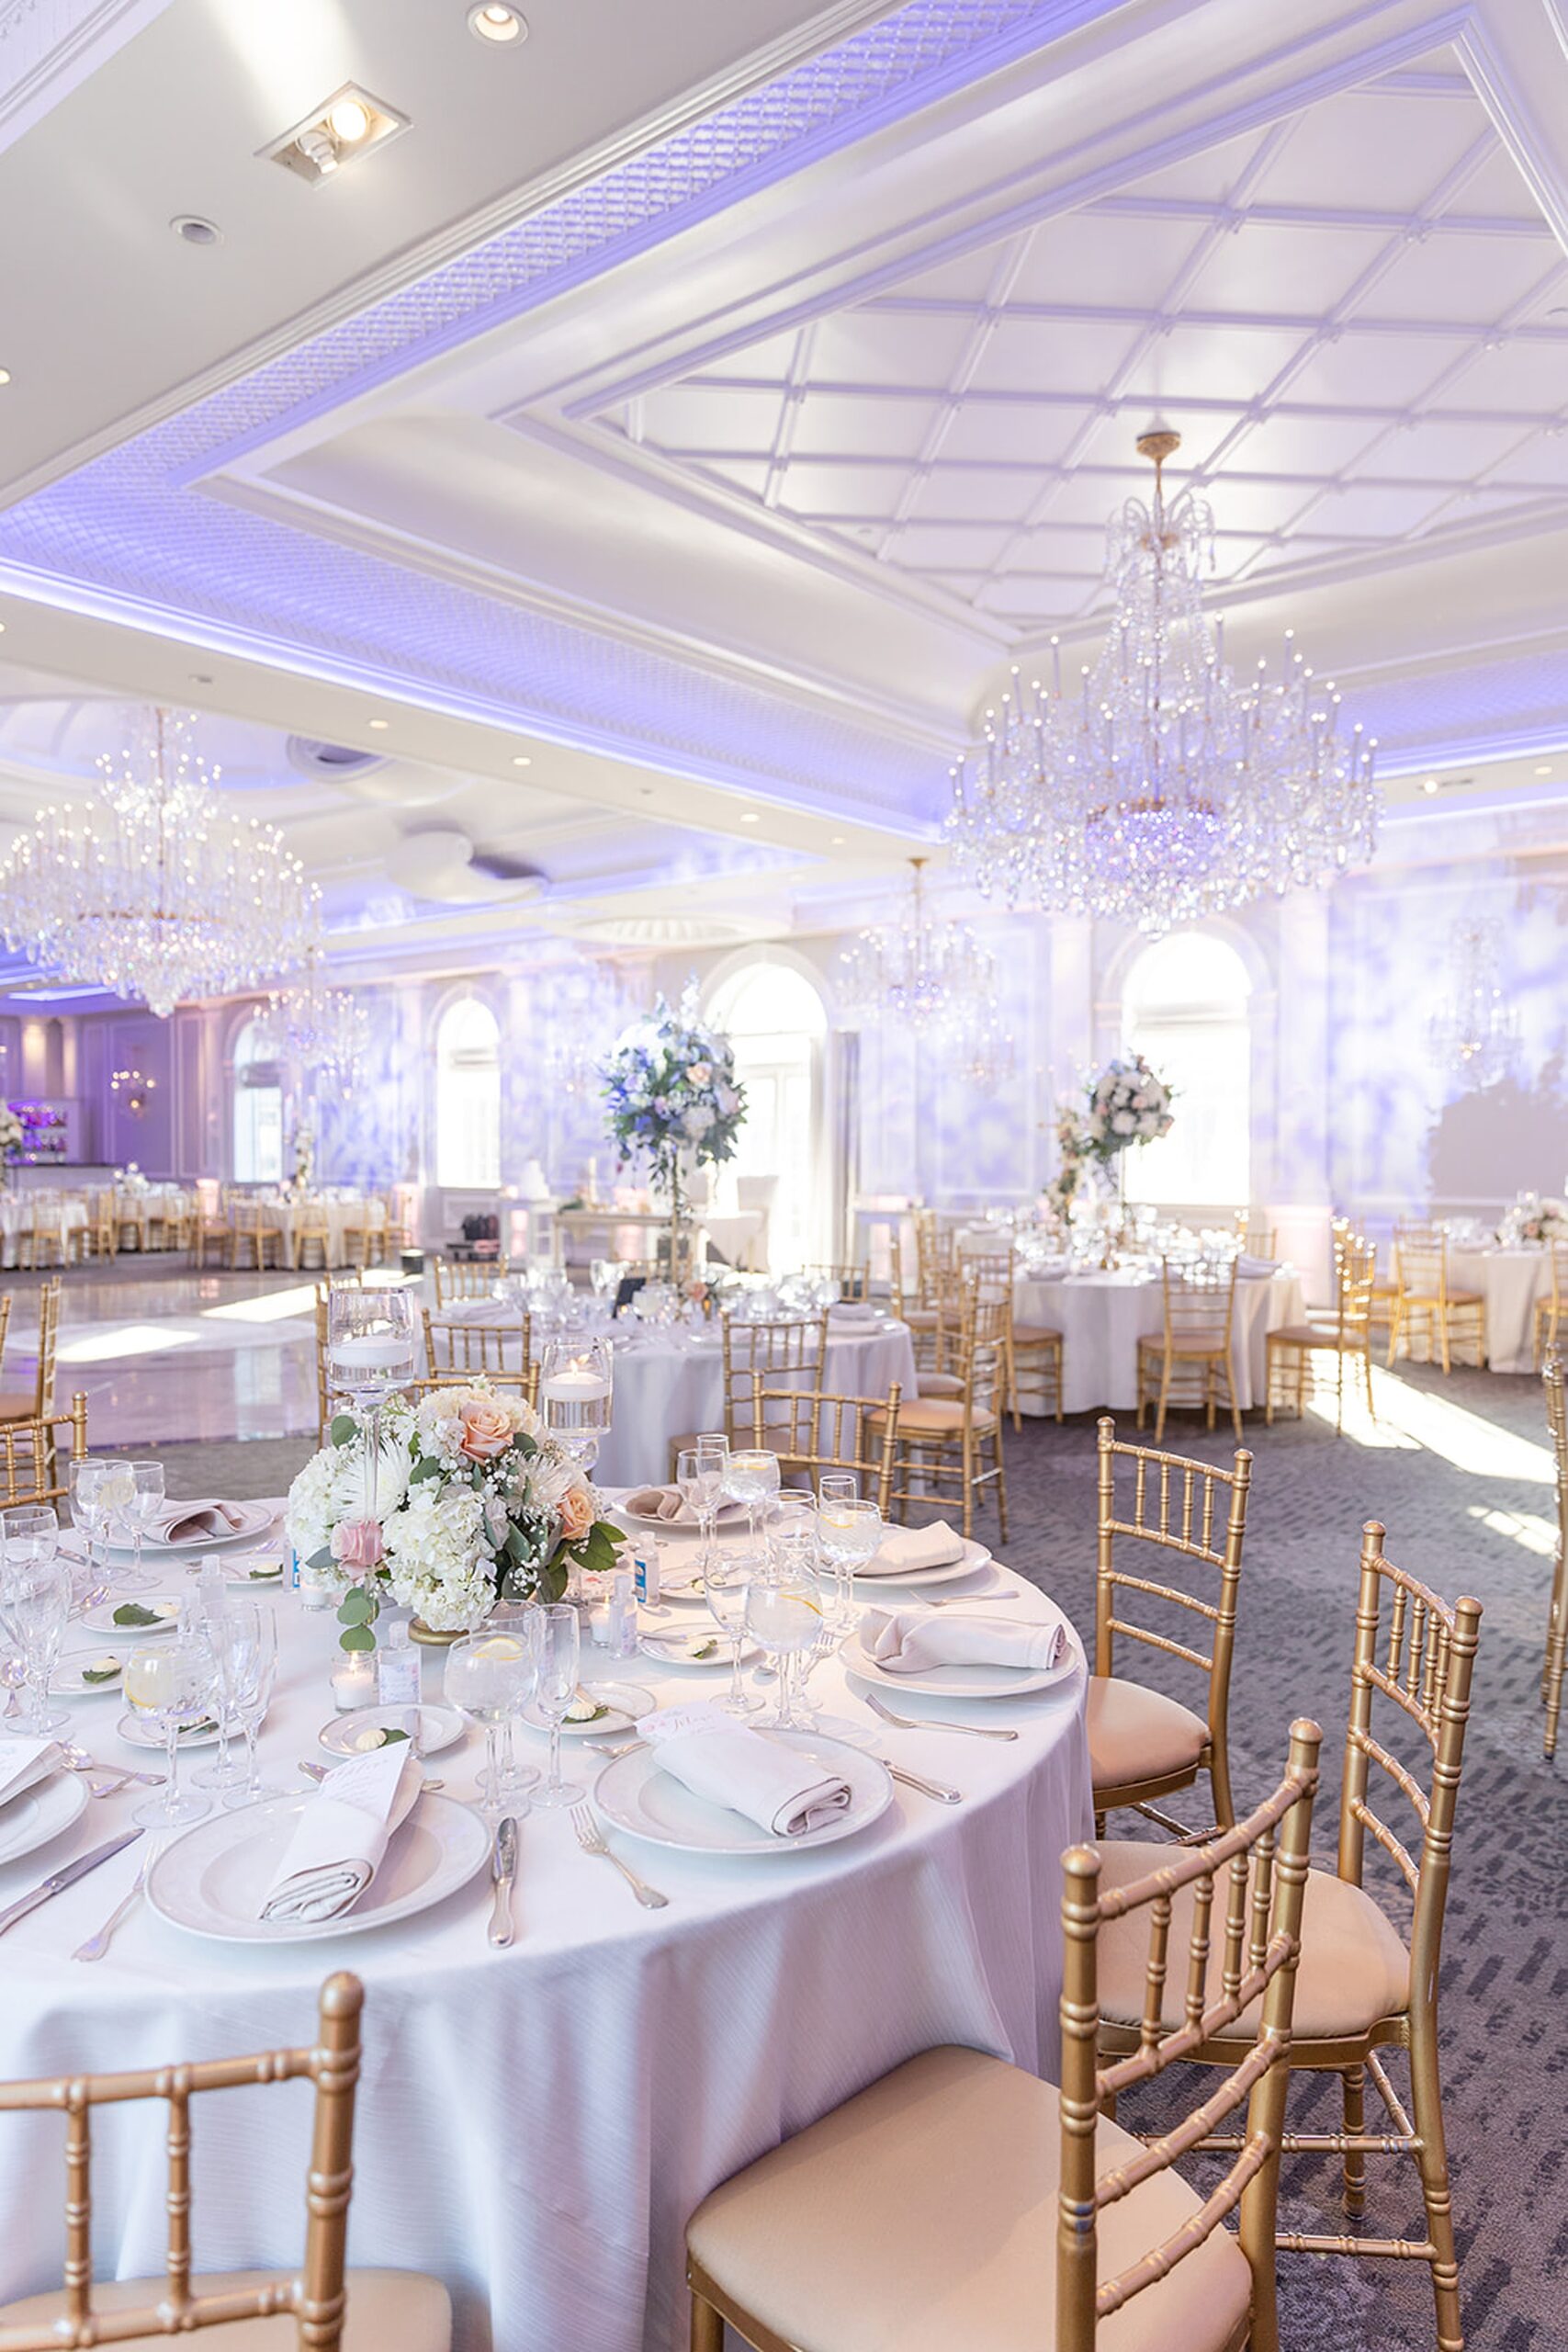 Details of a wedding reception ballroom setup with white linen and gold chairs at the rockleigh wedding venue